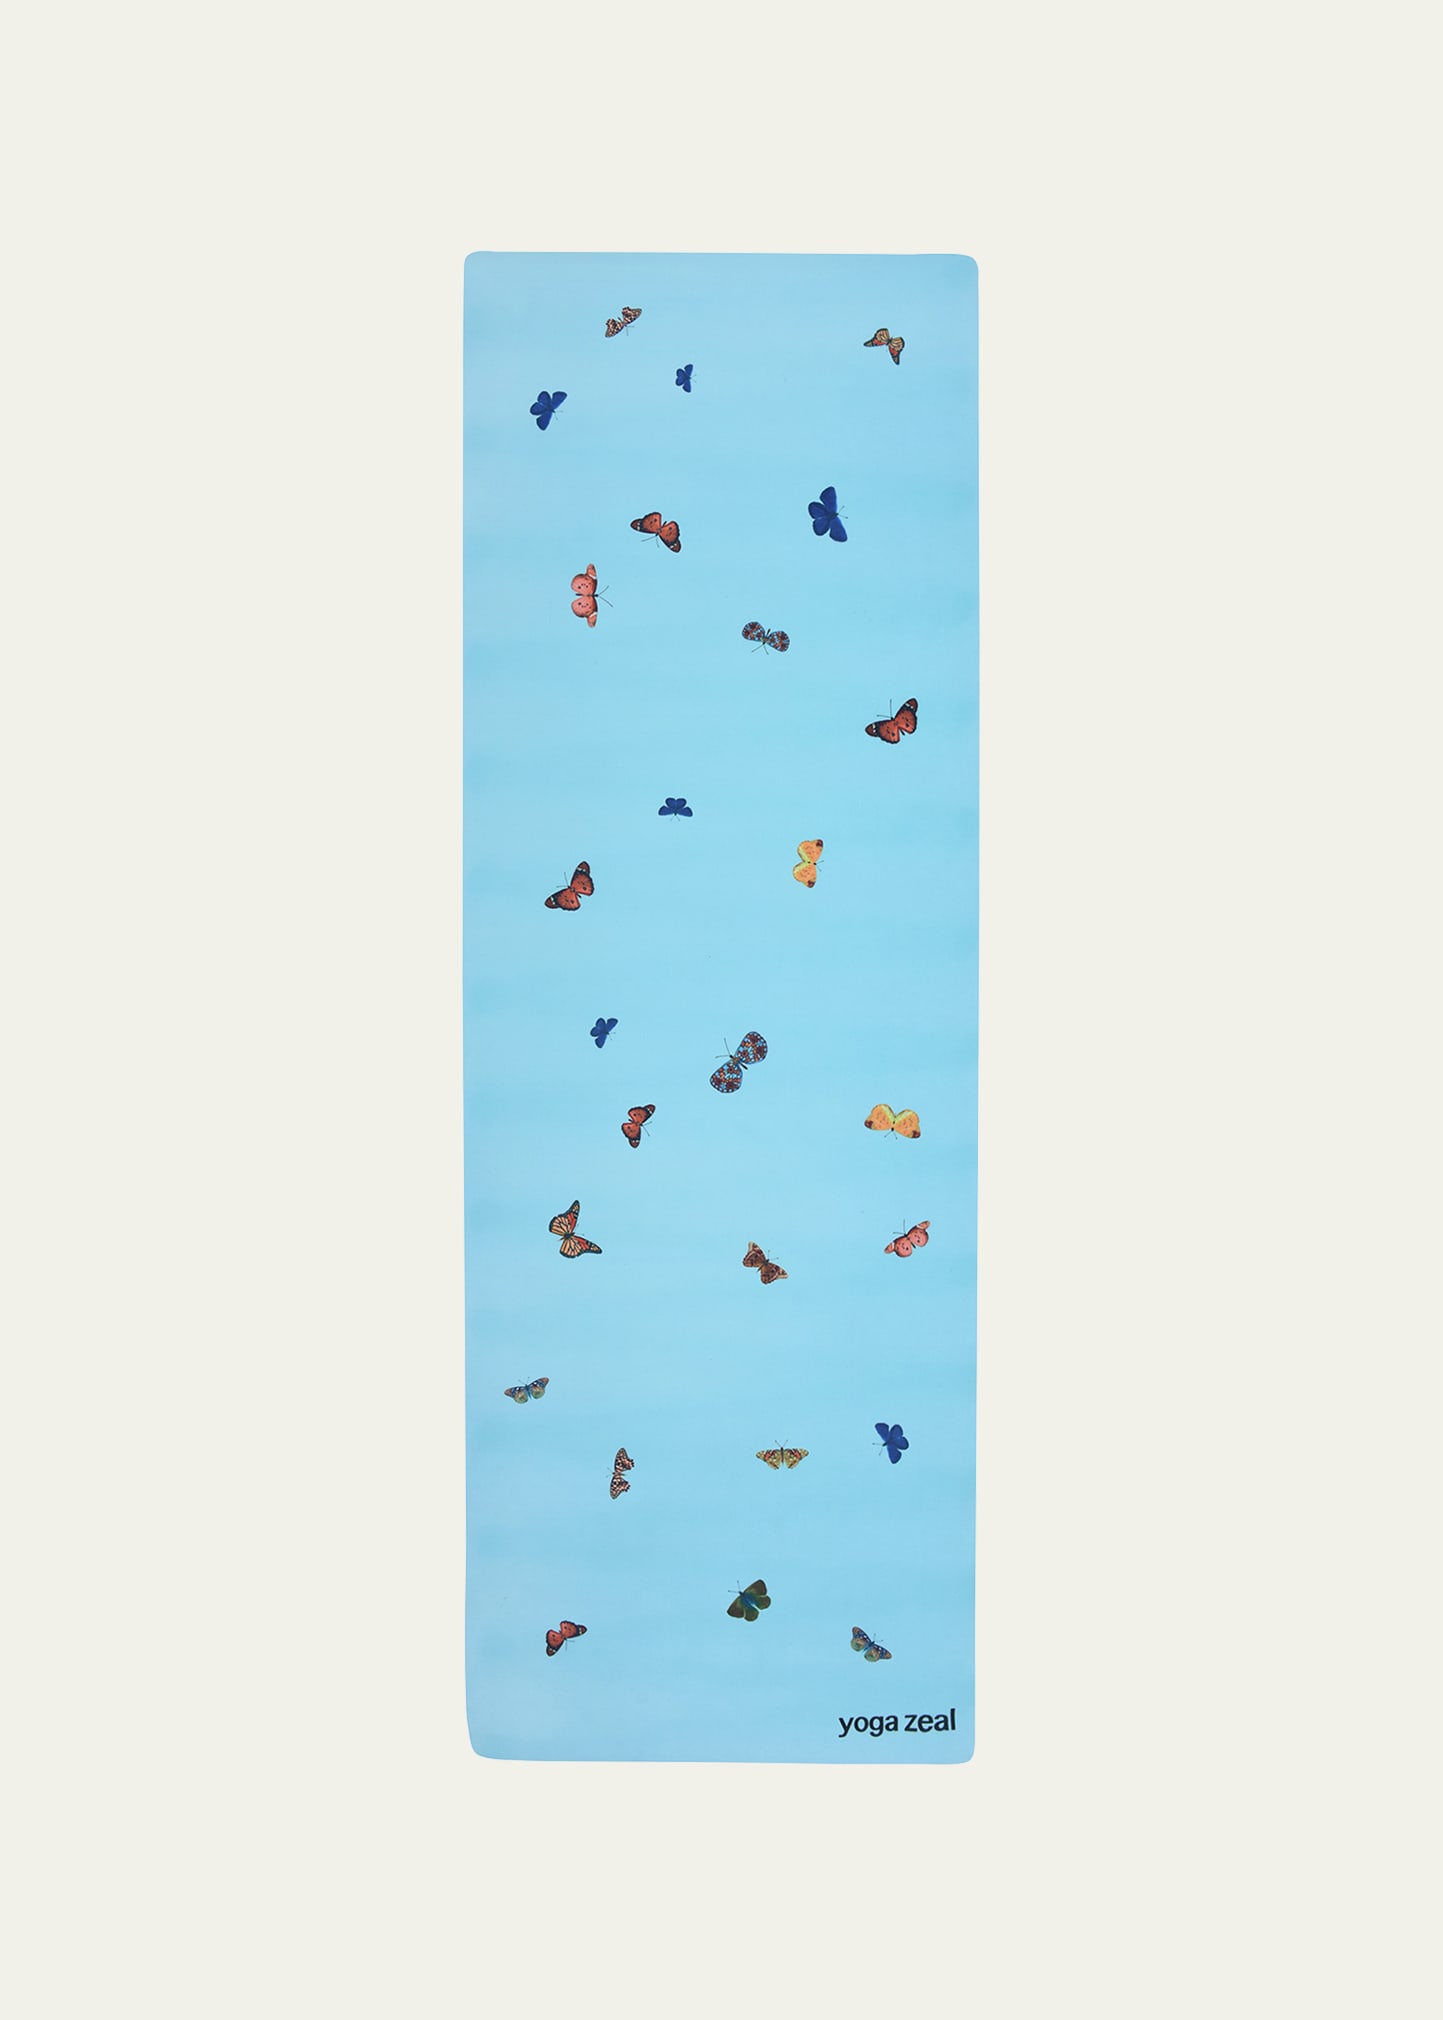 YOGA ZEAL BUTTERFLY PRINTED YOGA MAT